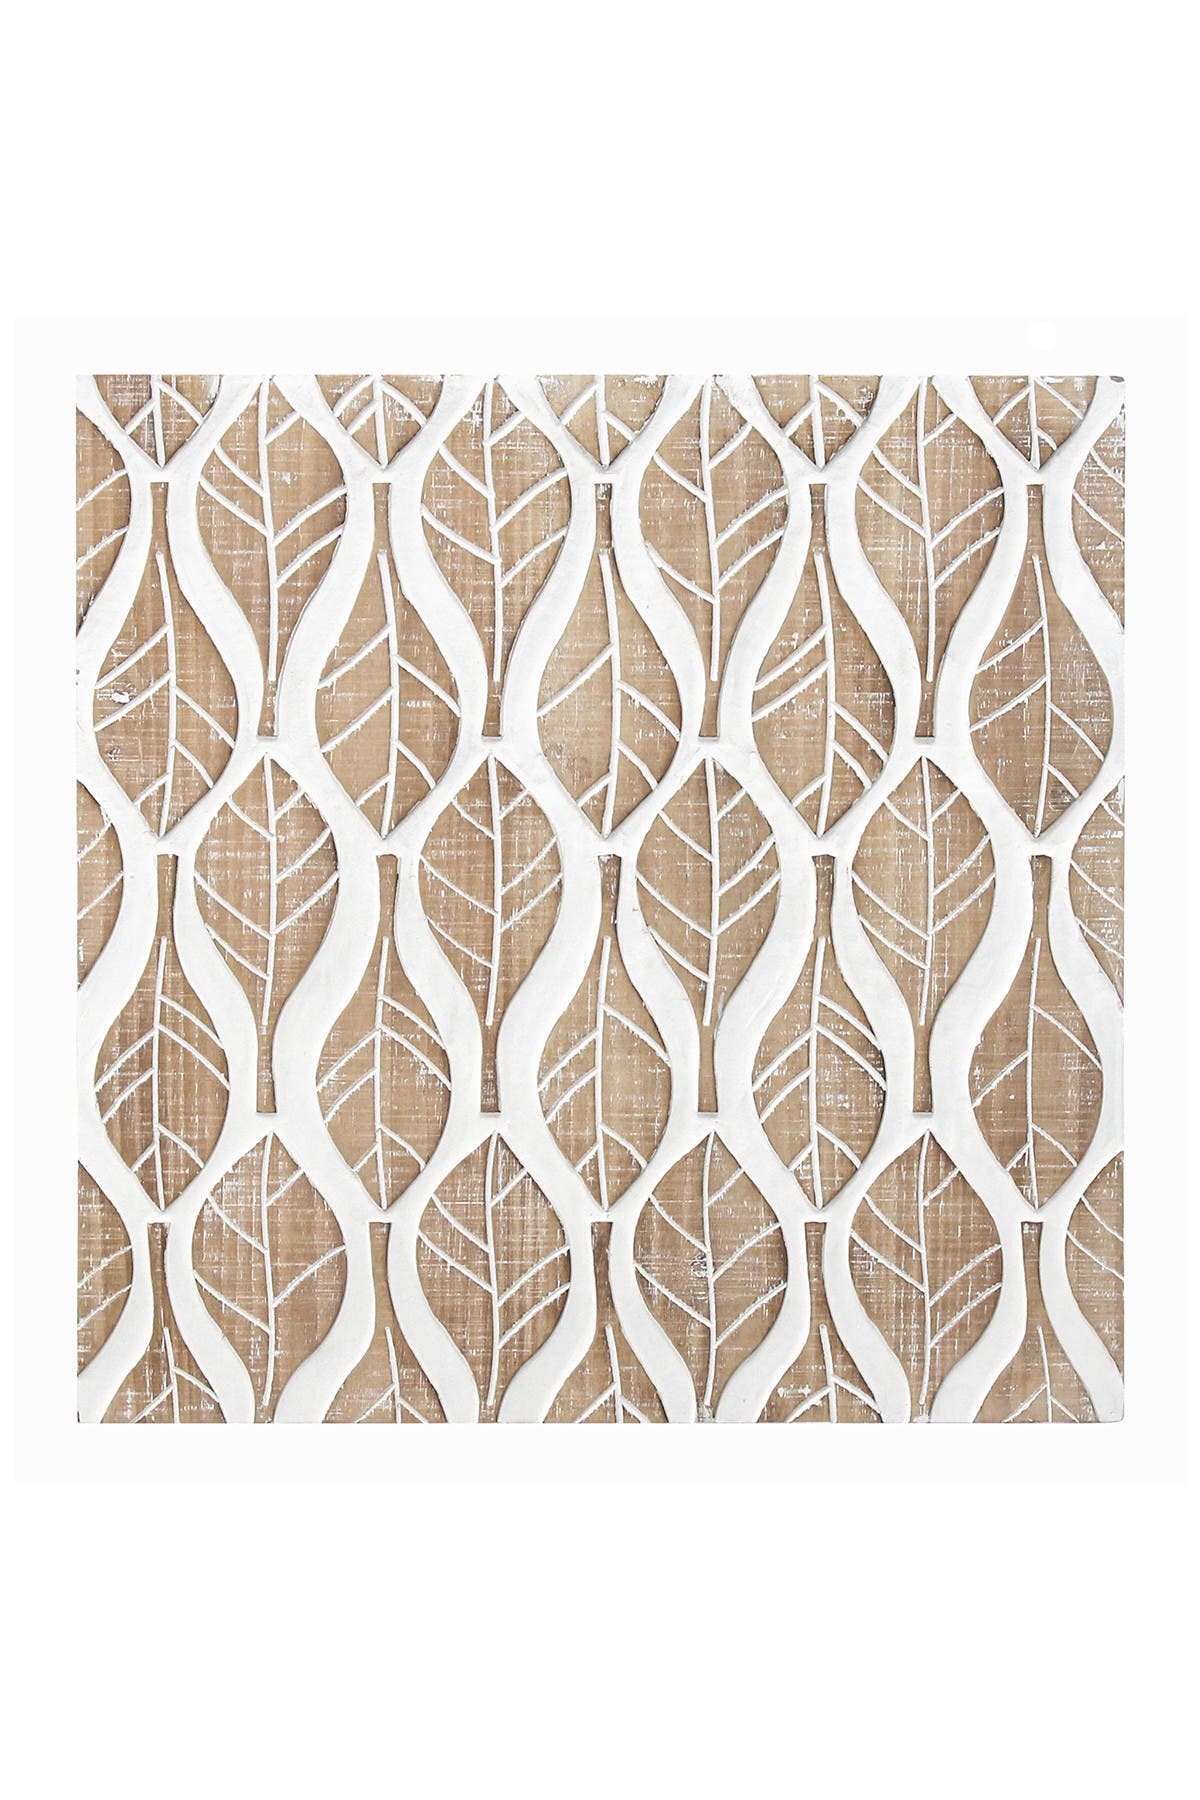 Stratton Home Leaf Patterned Wood Wall Decor Nordstrom Rack